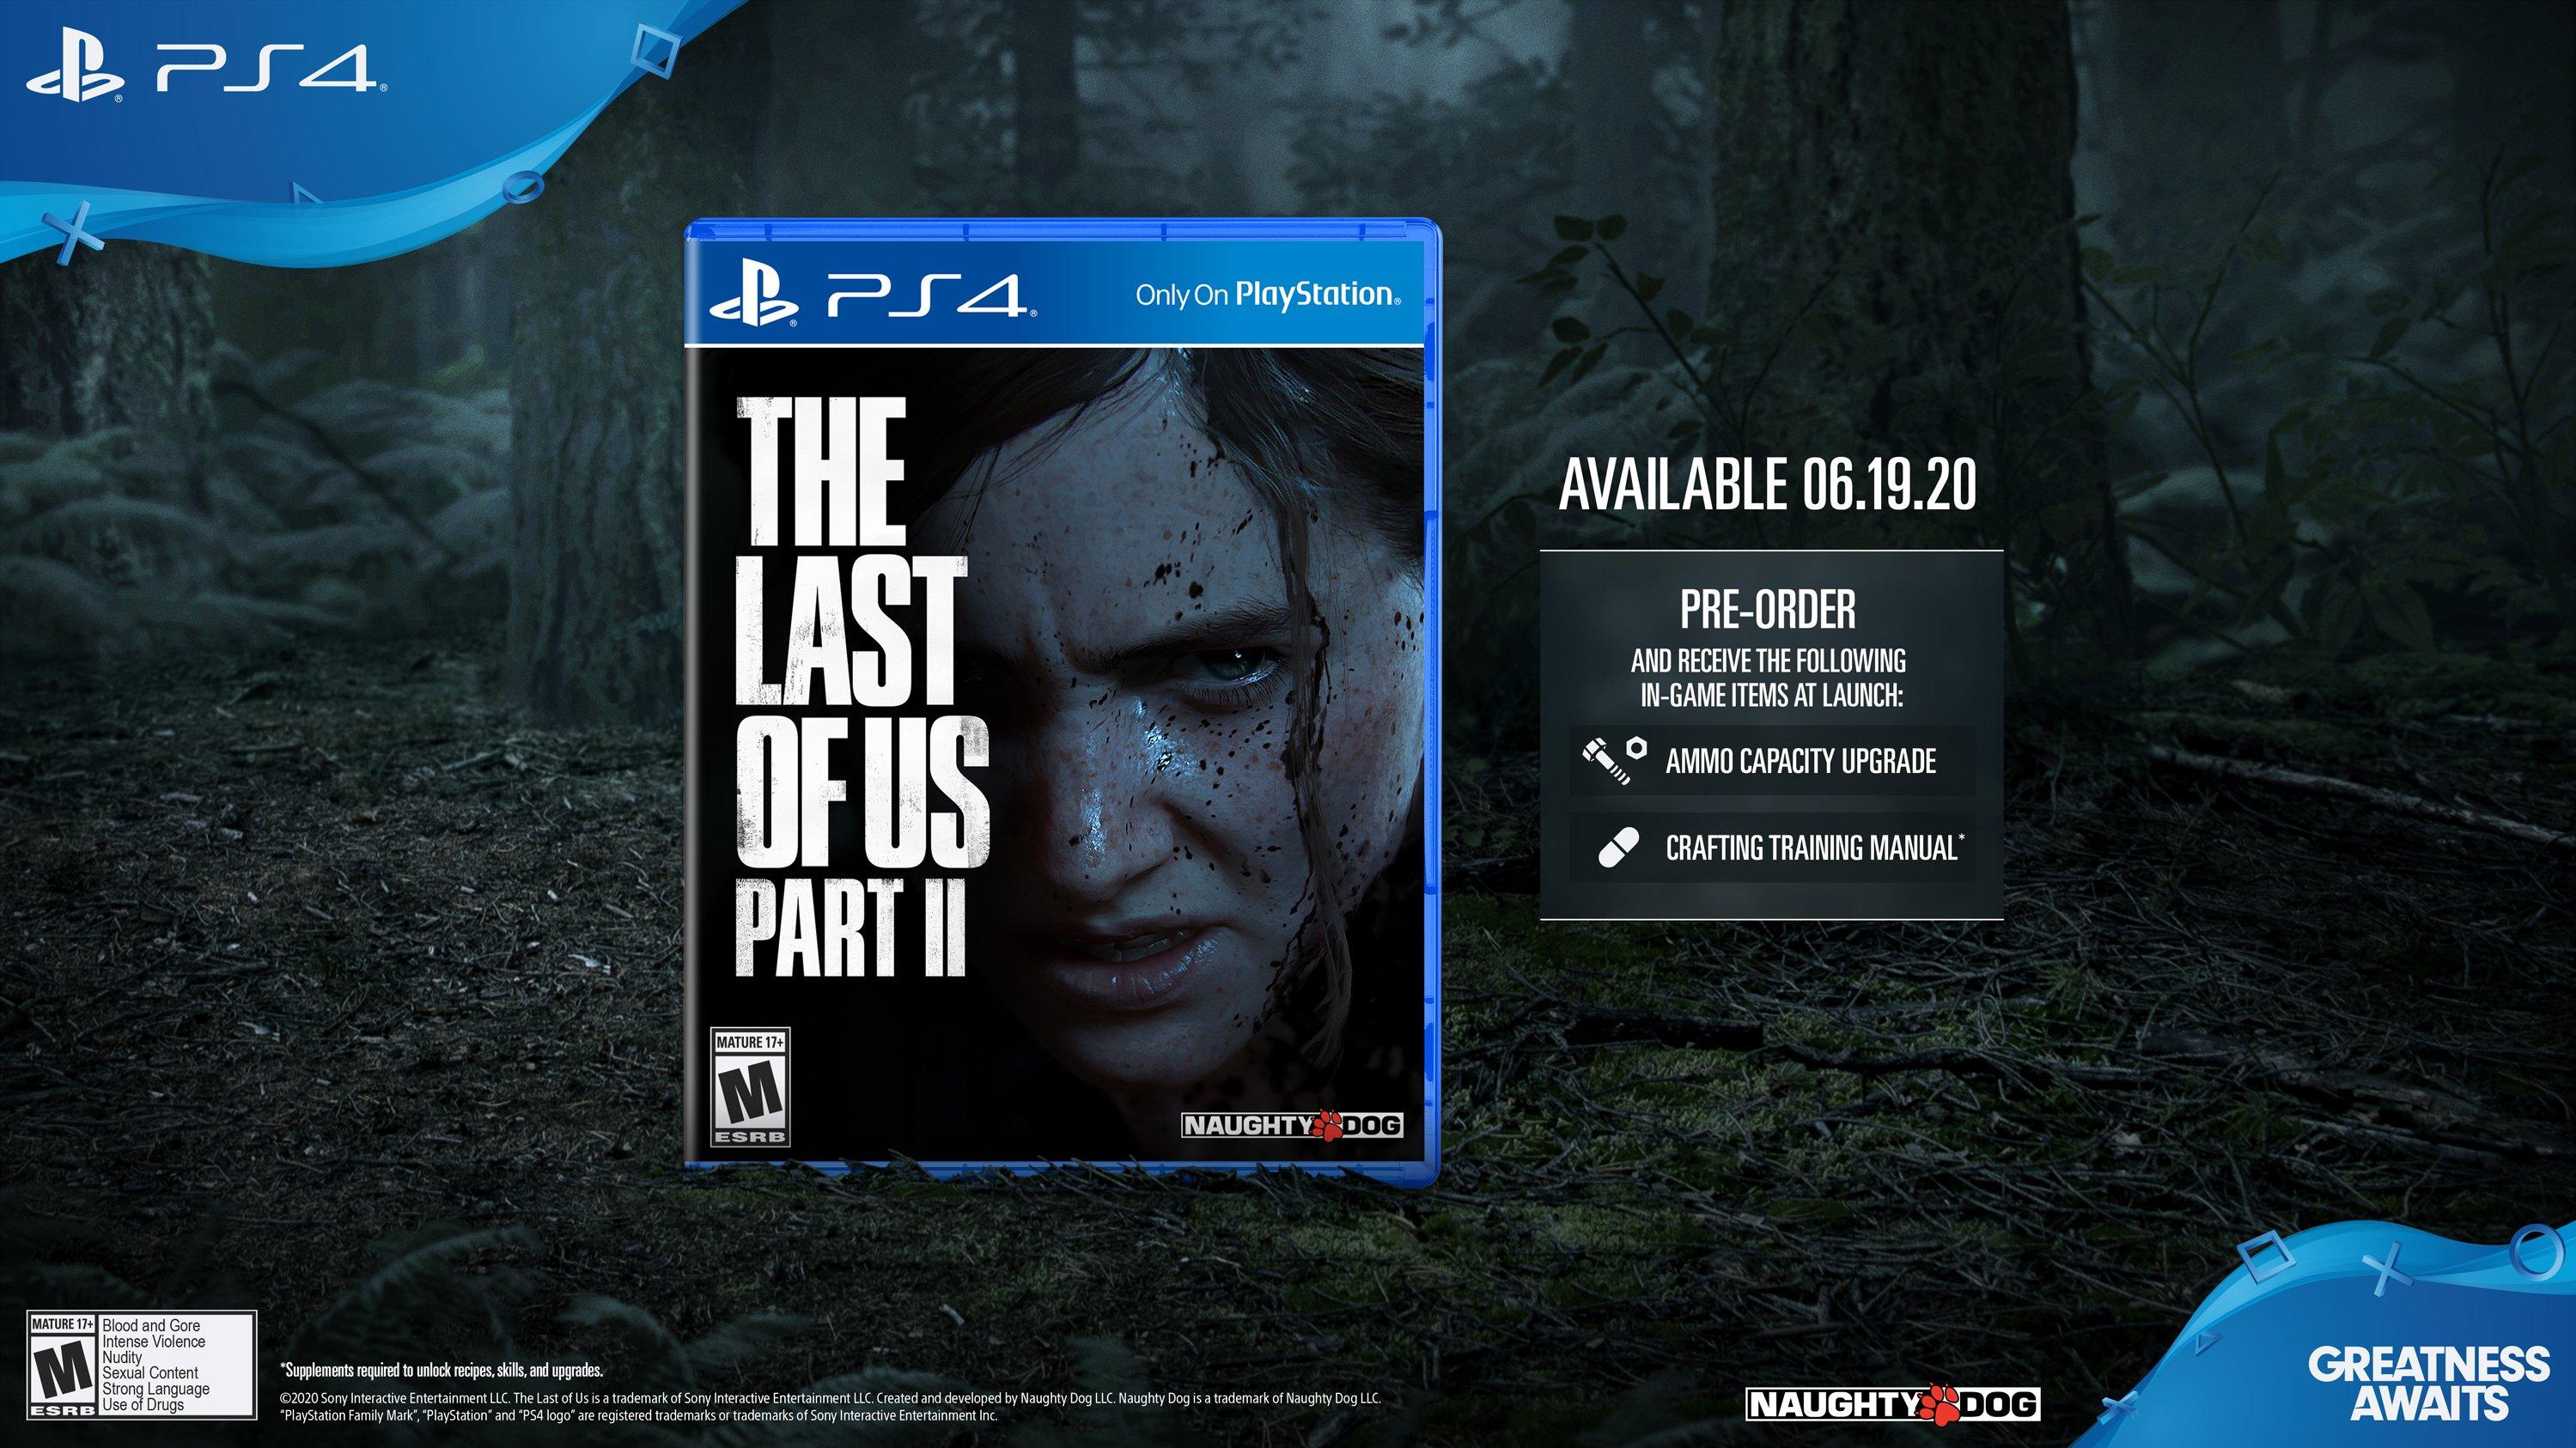 sony playstation 4 pro 1tb the last of us part ii